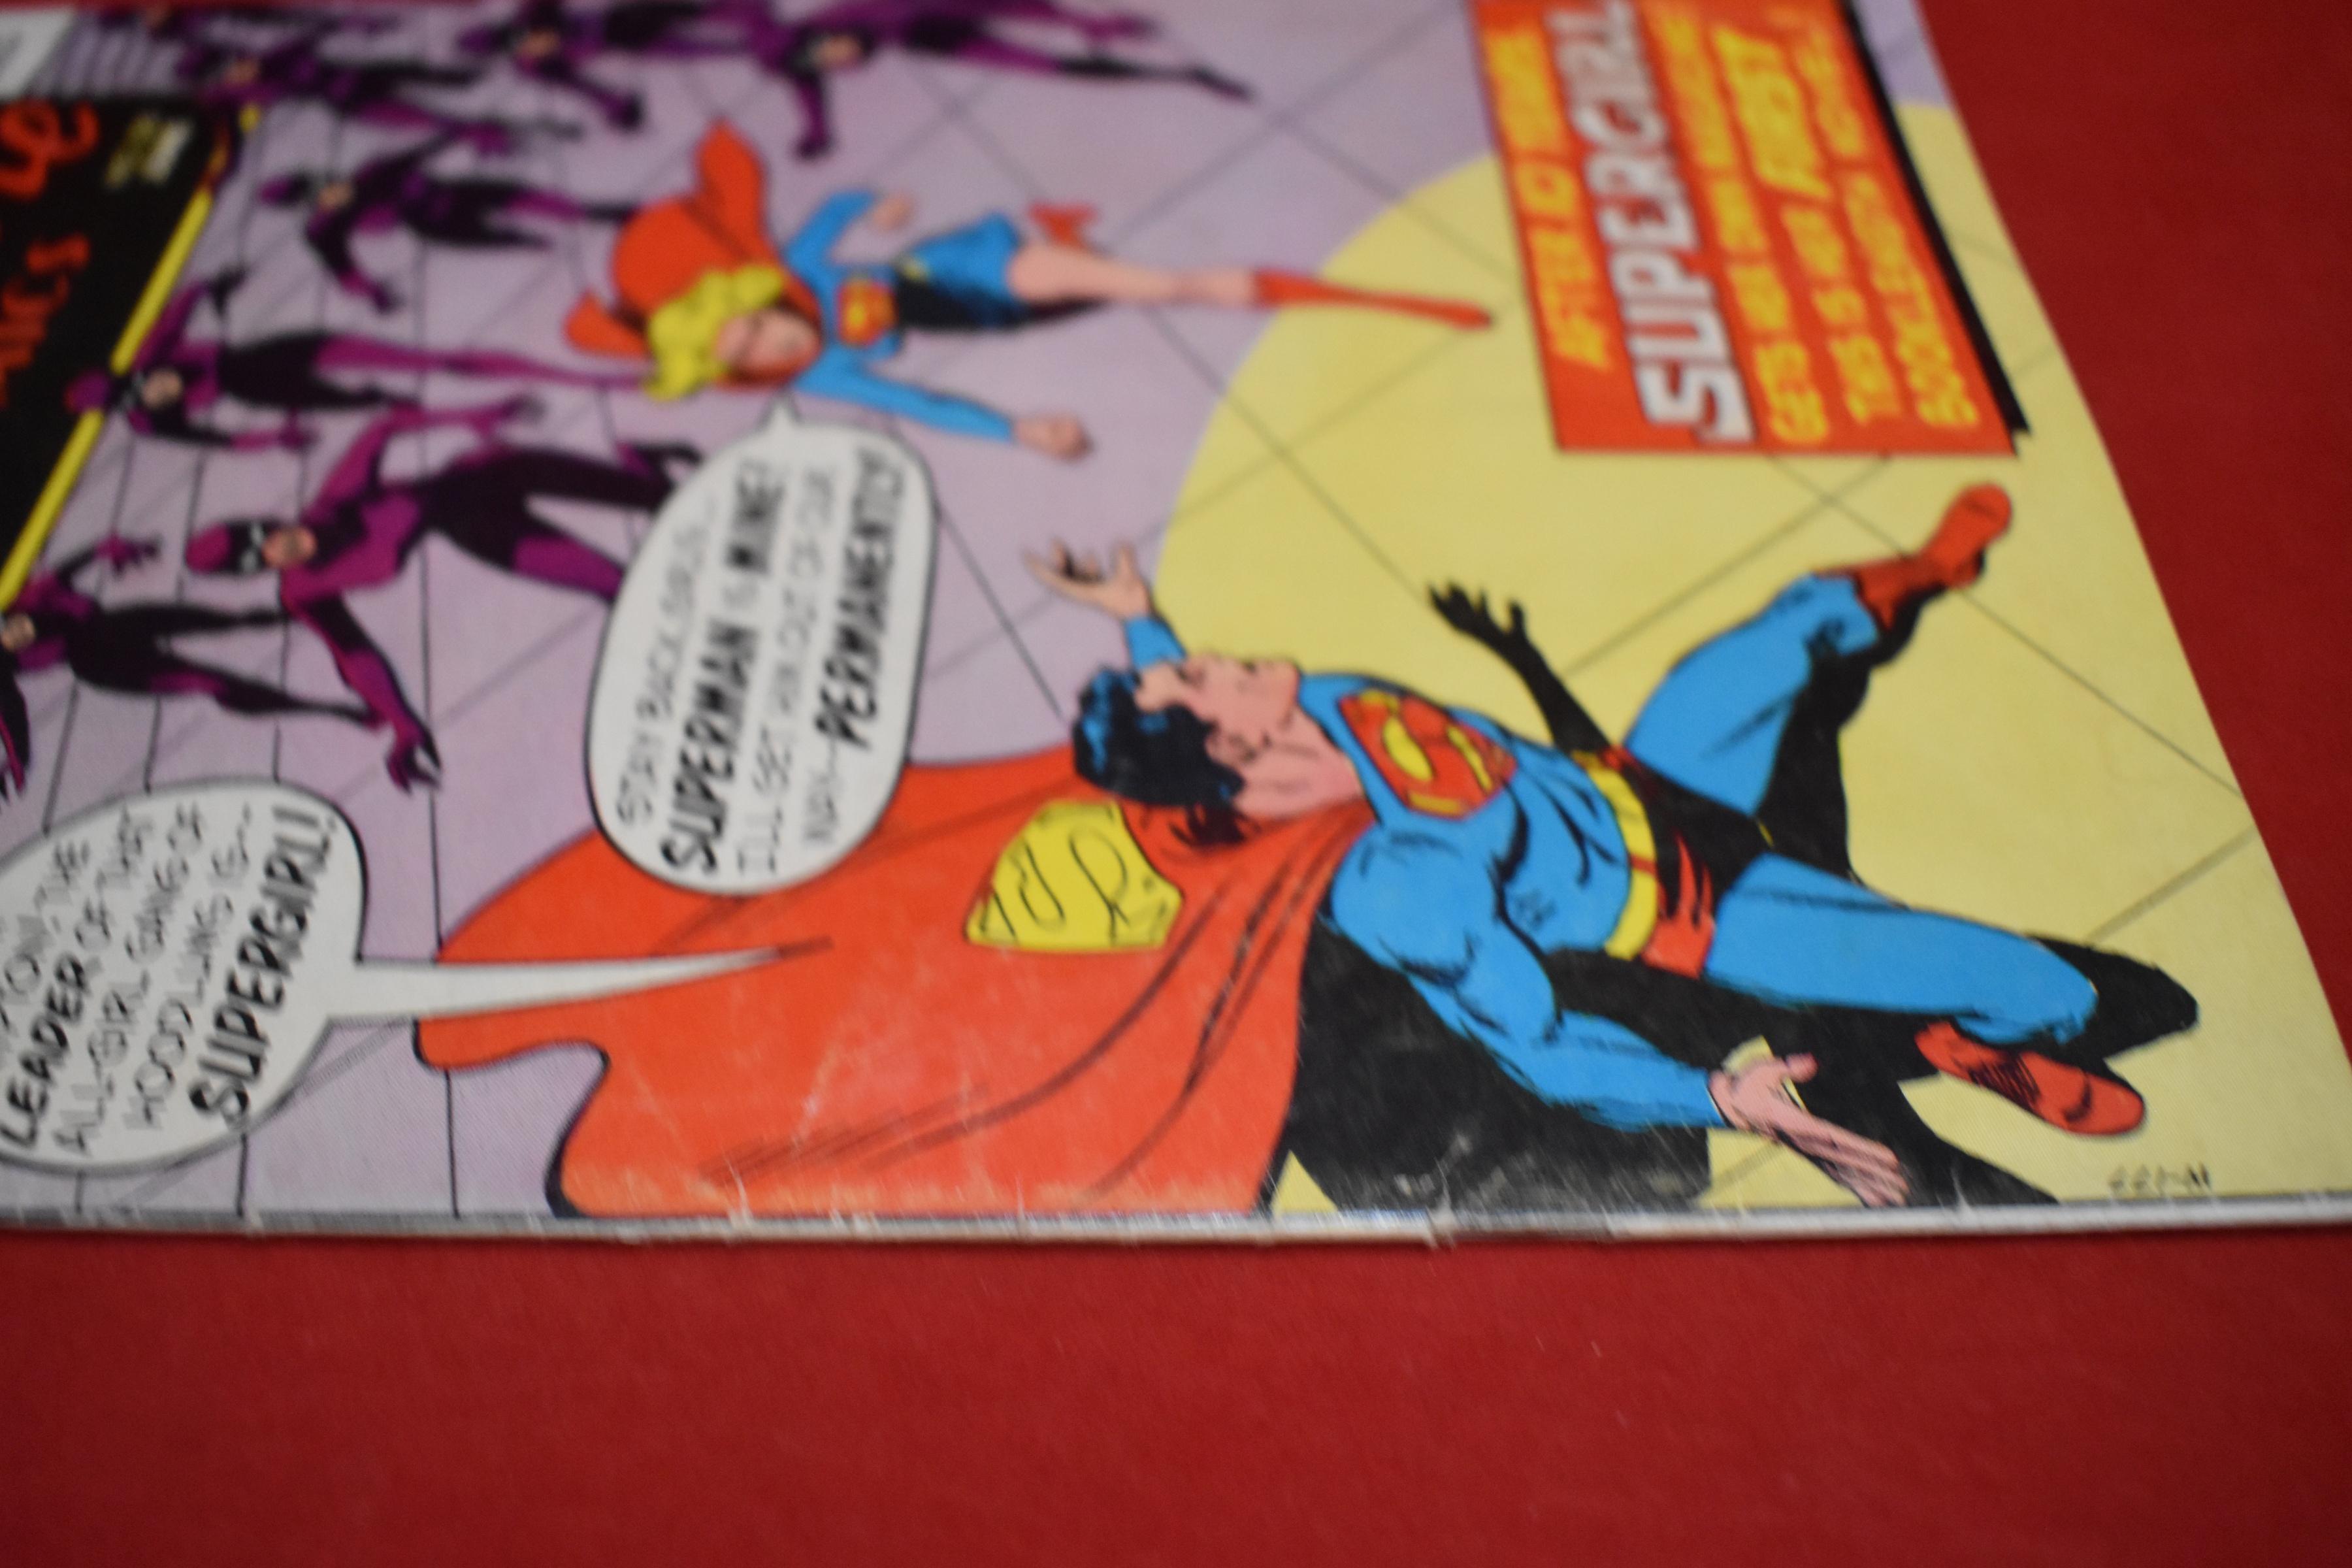 ADVENTURE COMICS #381 | KEY THE START OF ONGOING STORIES FEATURING SUPERGIRL!